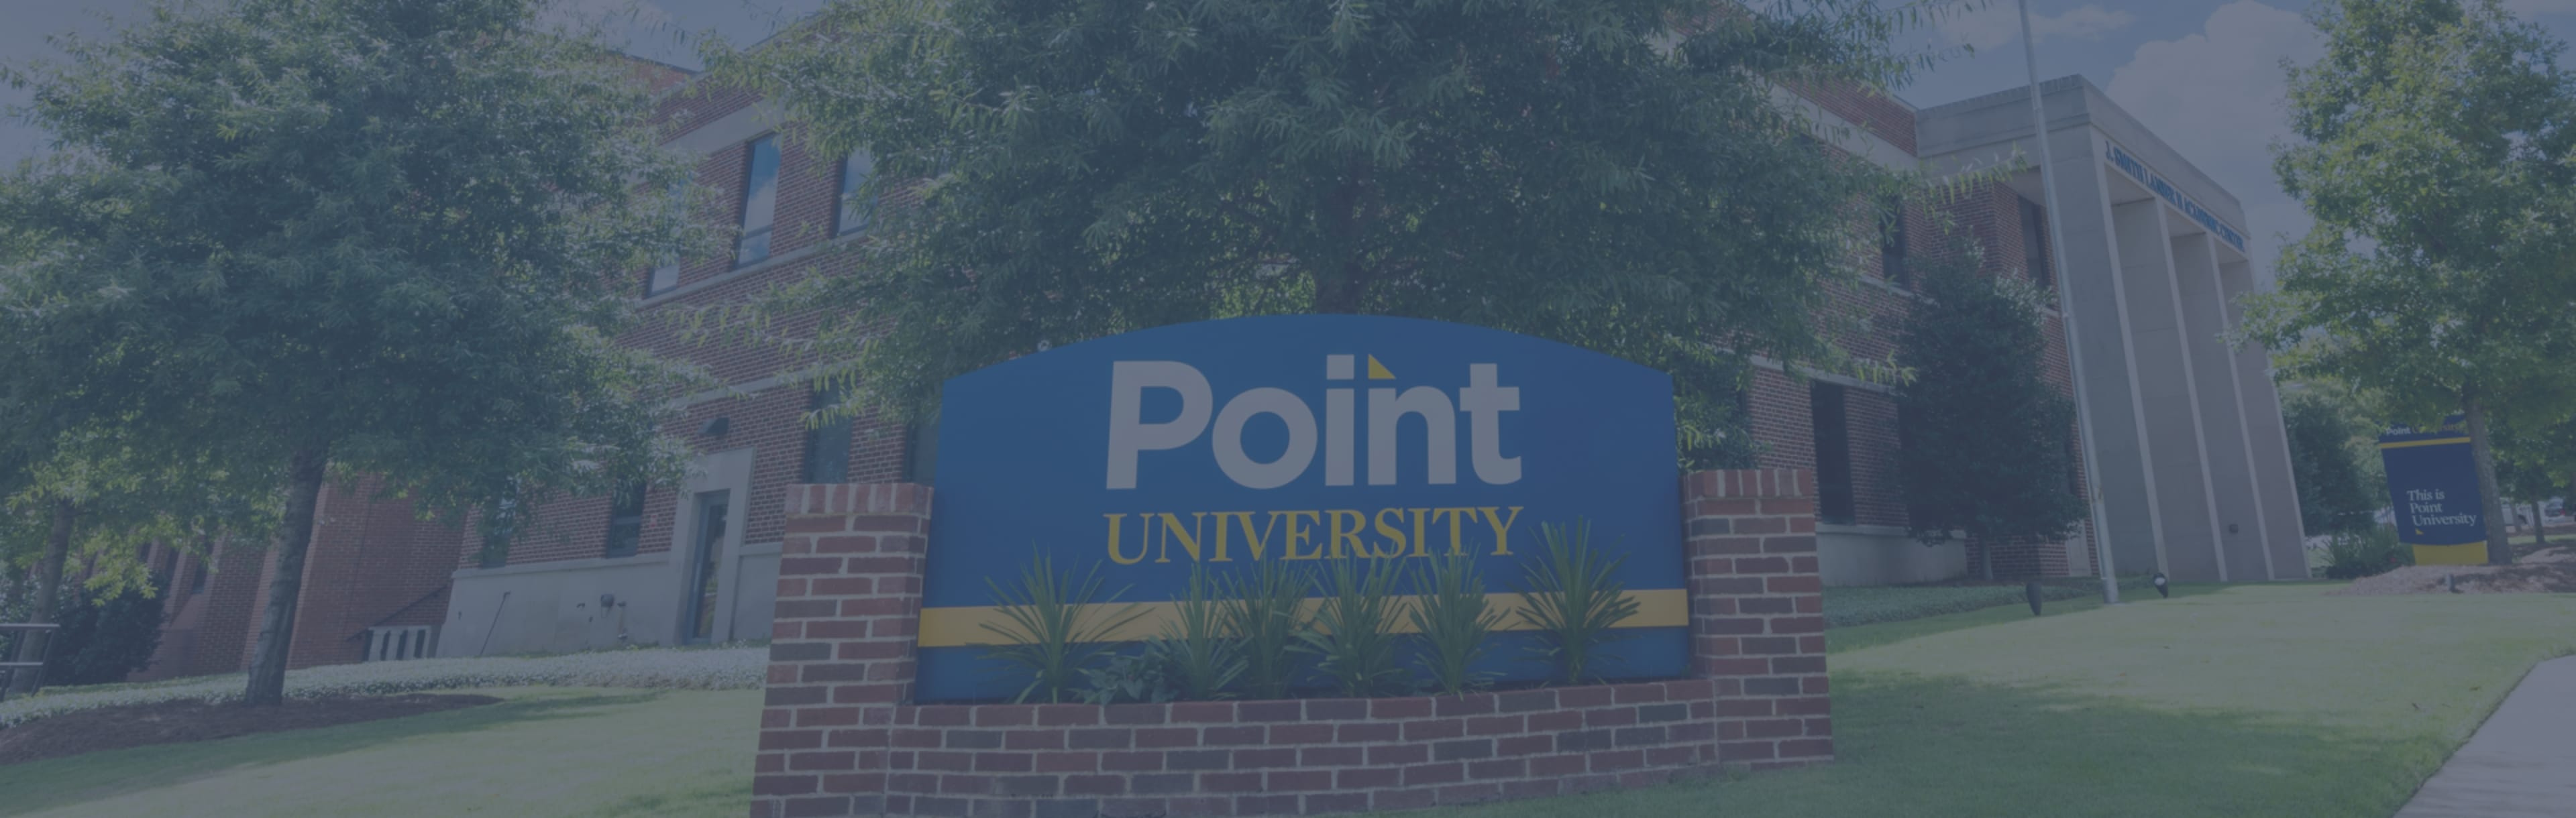 Point University Online Bachelor of Science in Business Administration